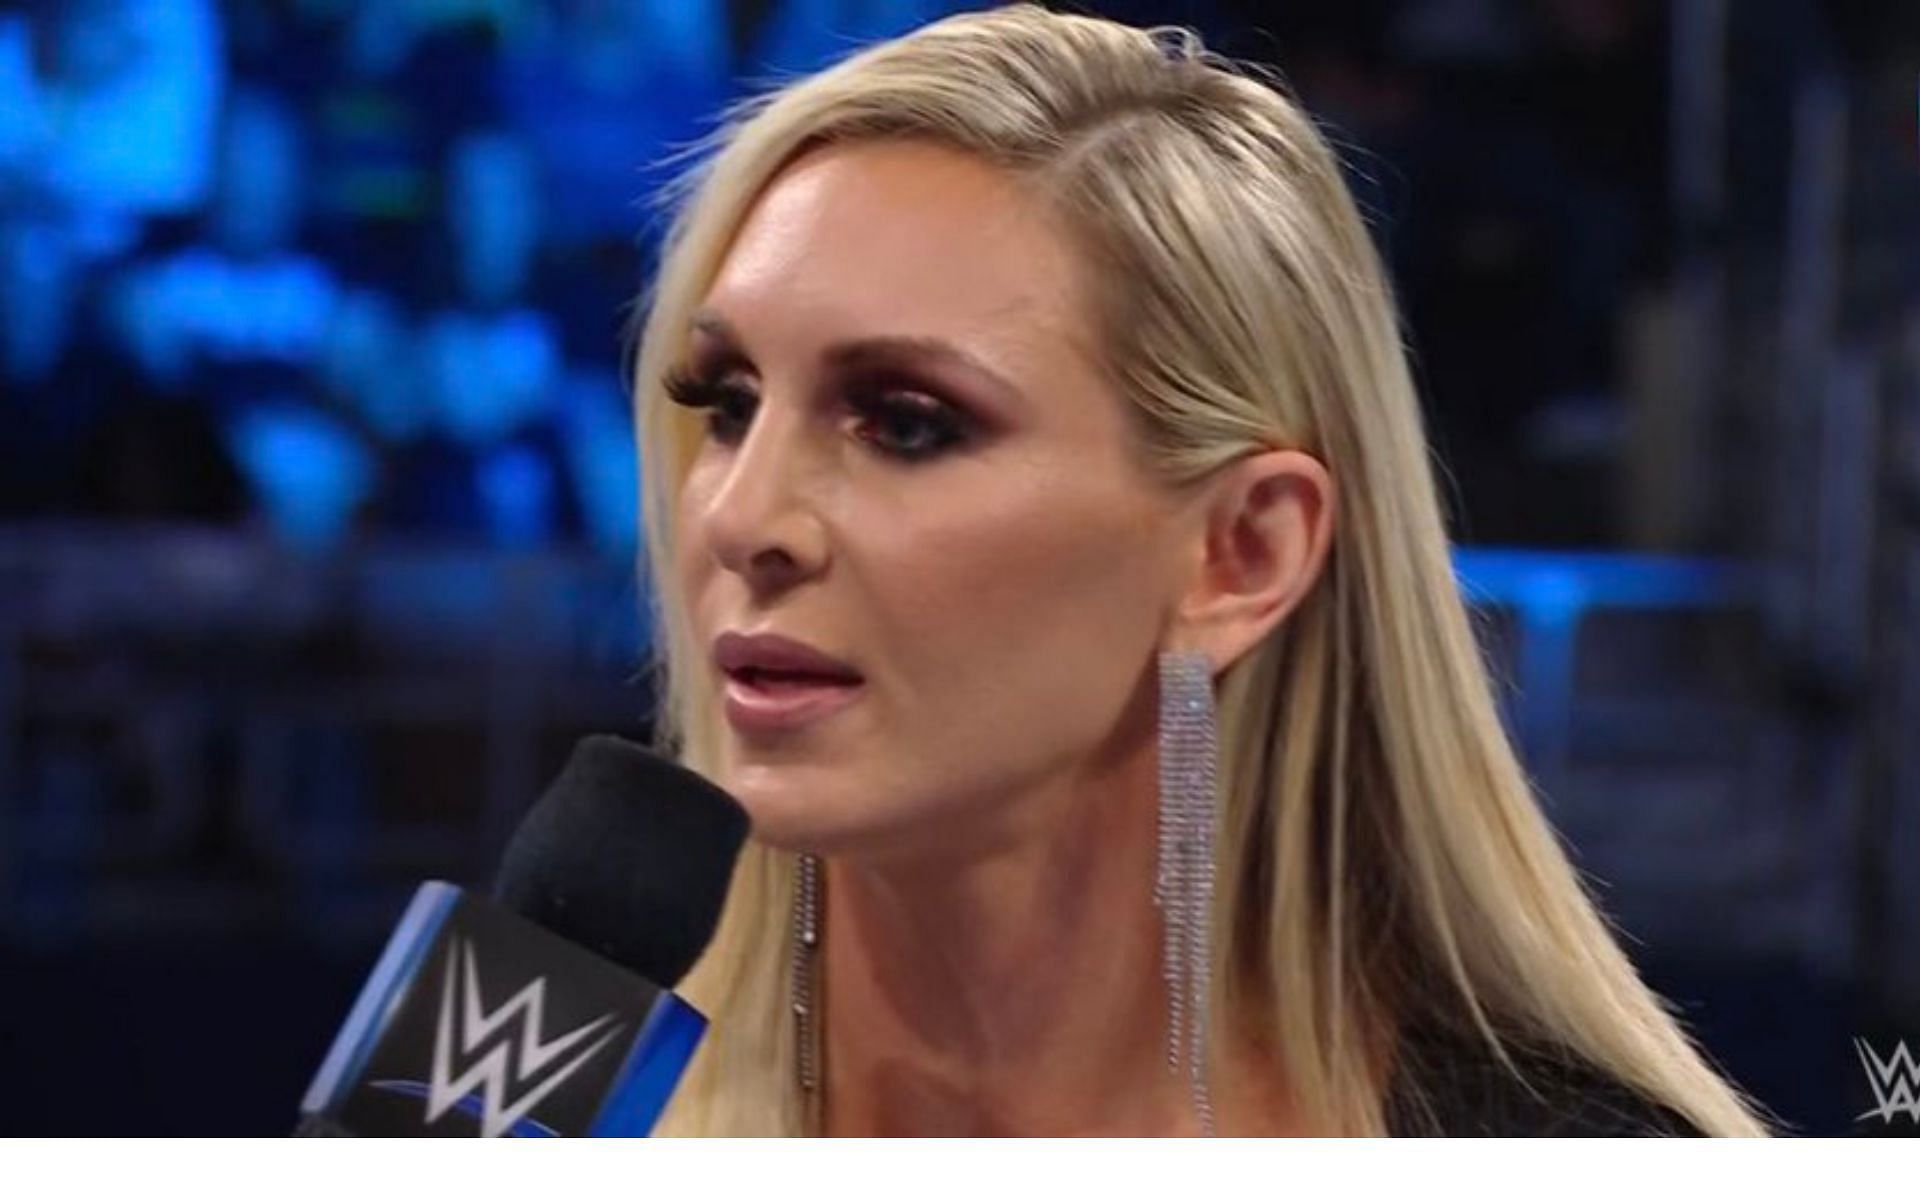 The Queen wasn&#039;t happy with her interviewer on SmackDown